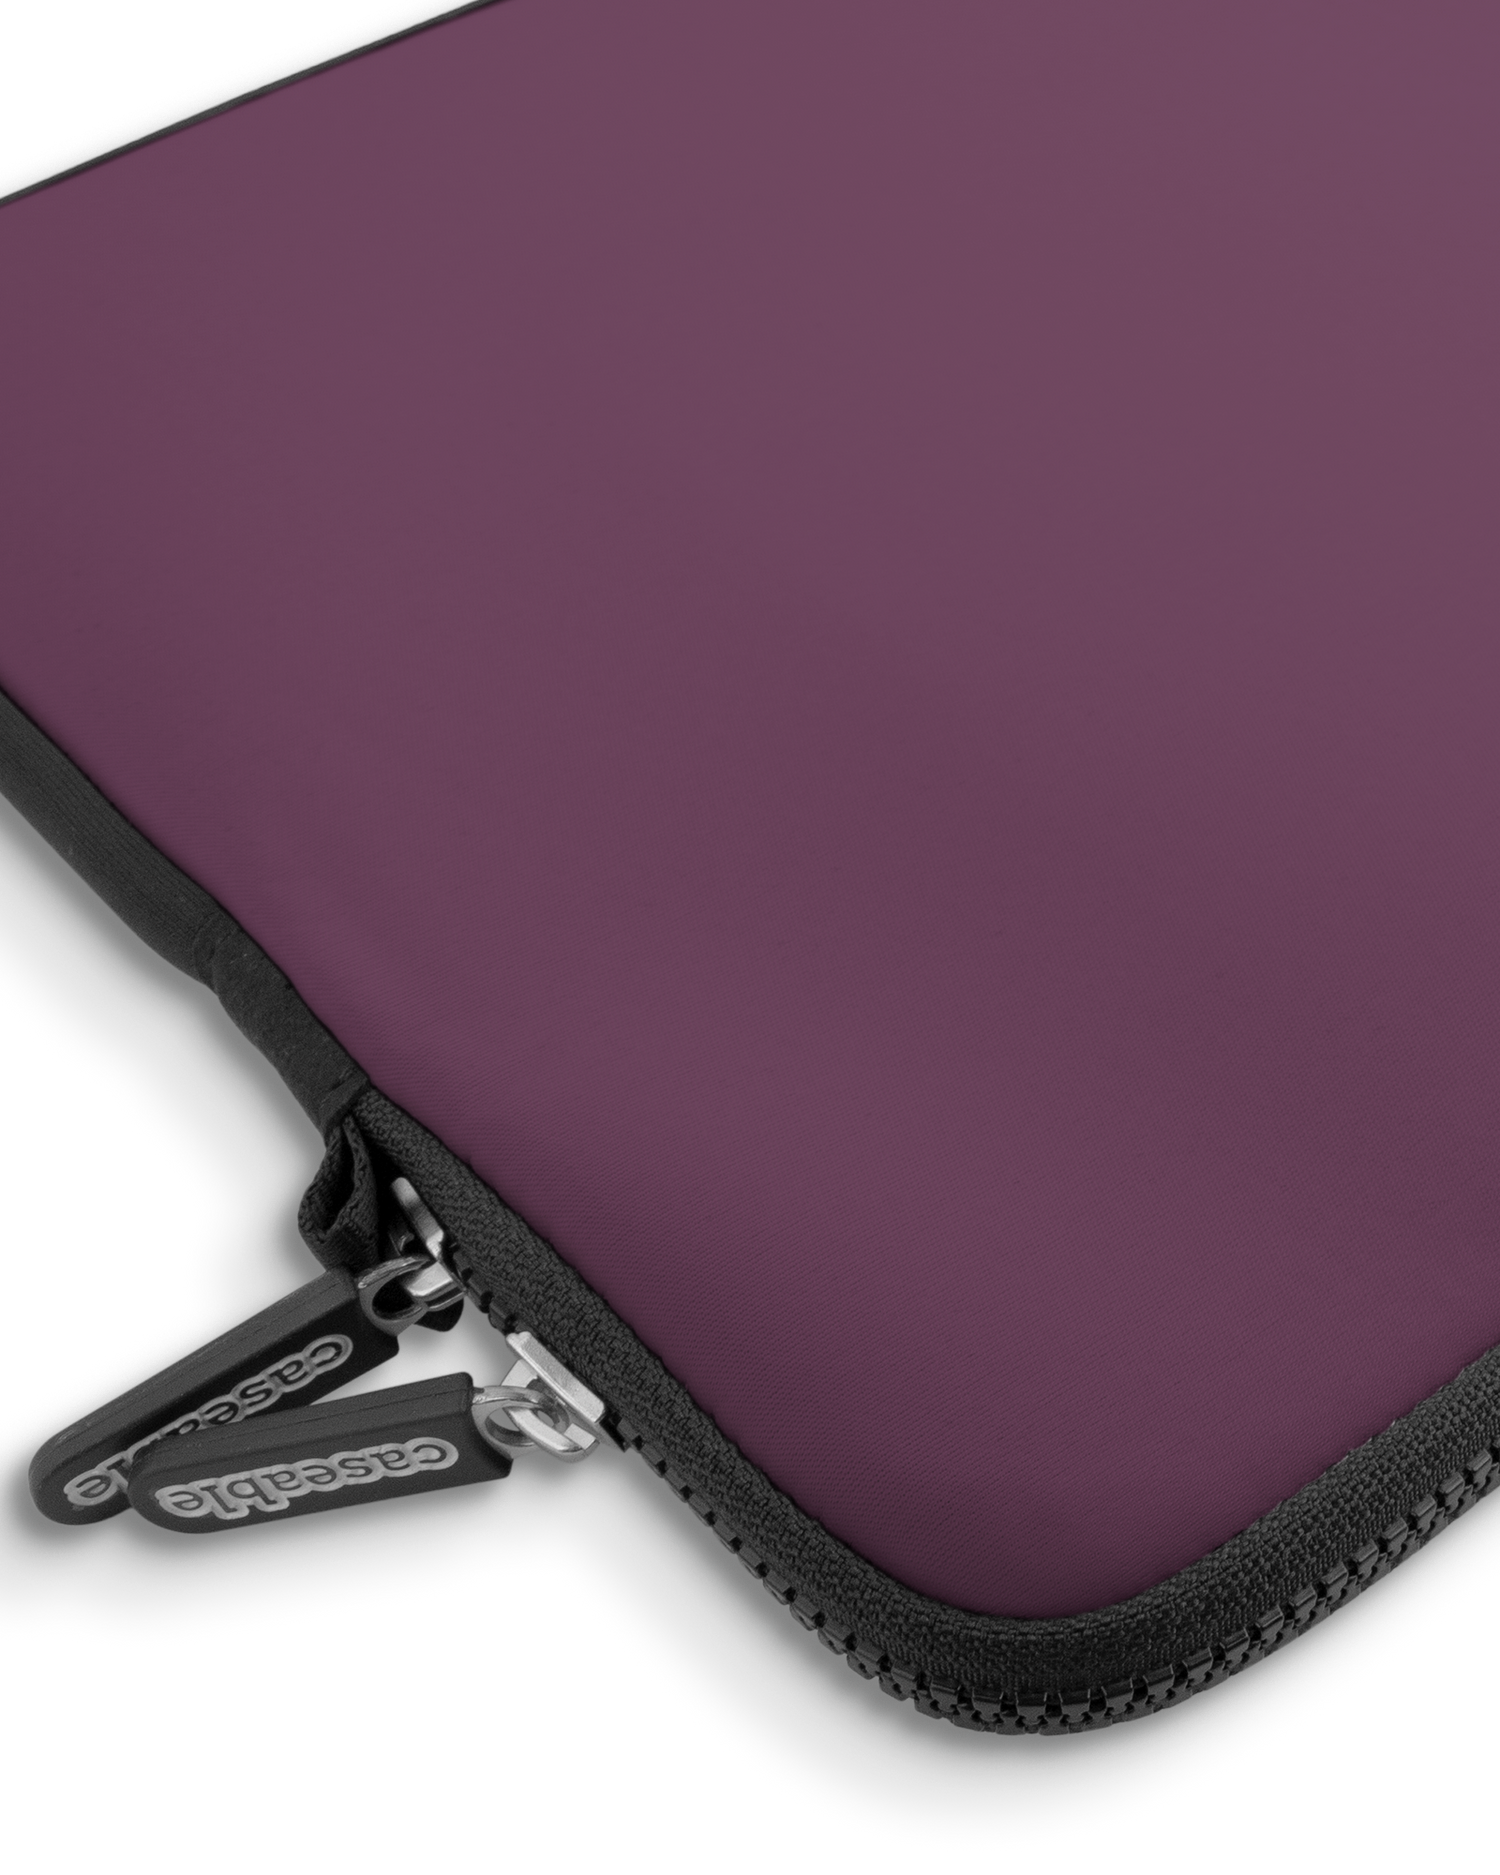 PLUM Premium Laptop Bag 15 inch with device inside